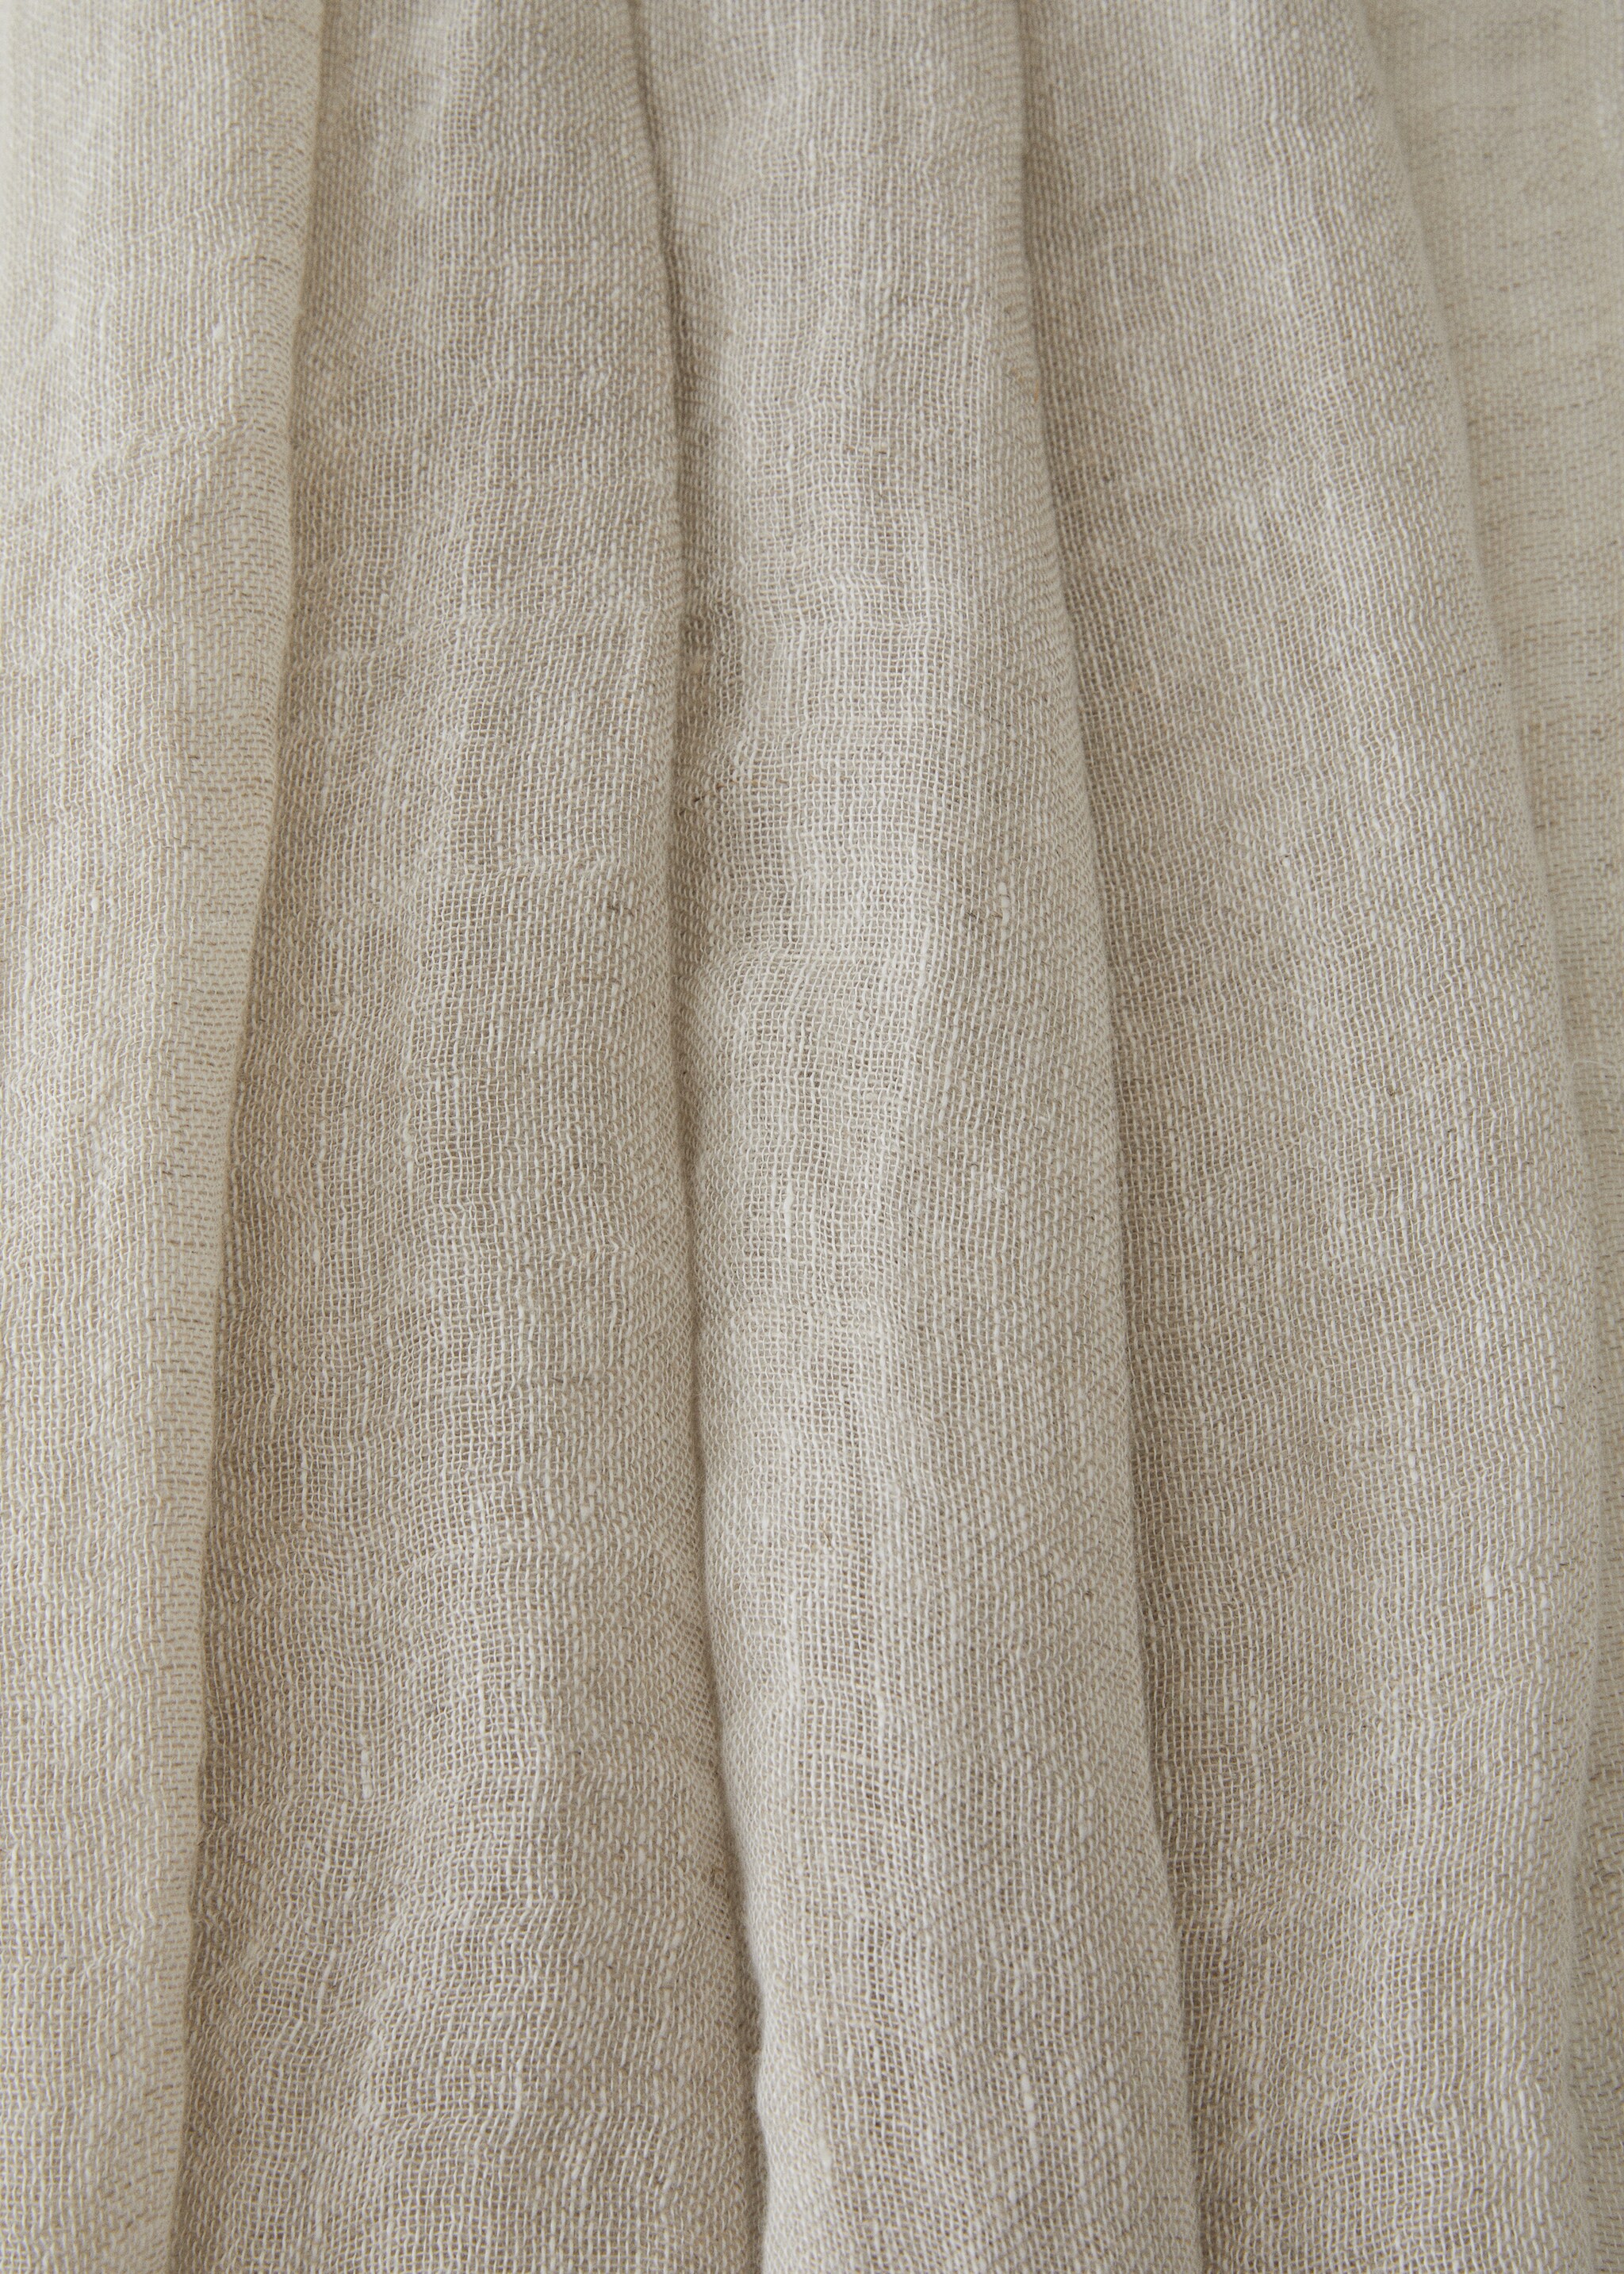 100% curtain linen 57.09x102.36 in - Details of the article 3